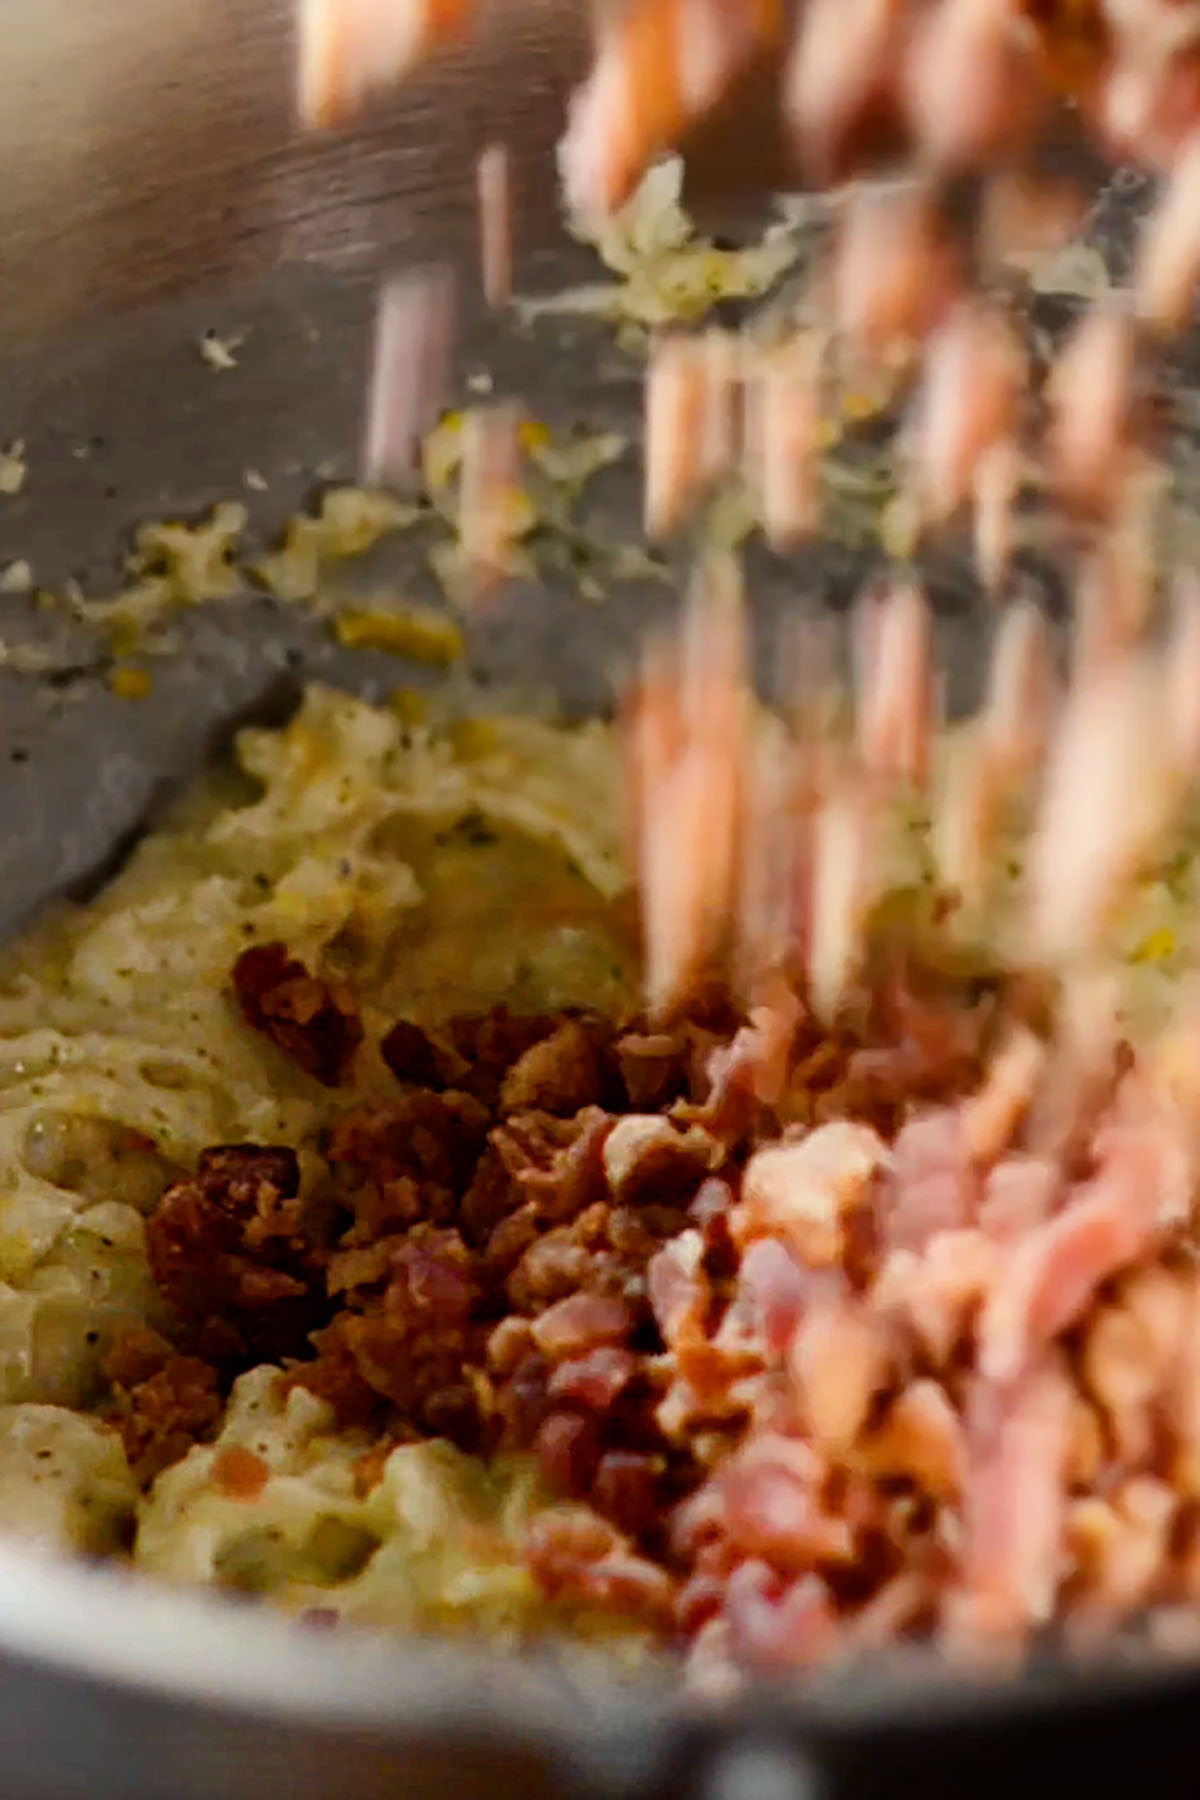 Bacon bits being added to mashed potatoes in a mixing bowl.